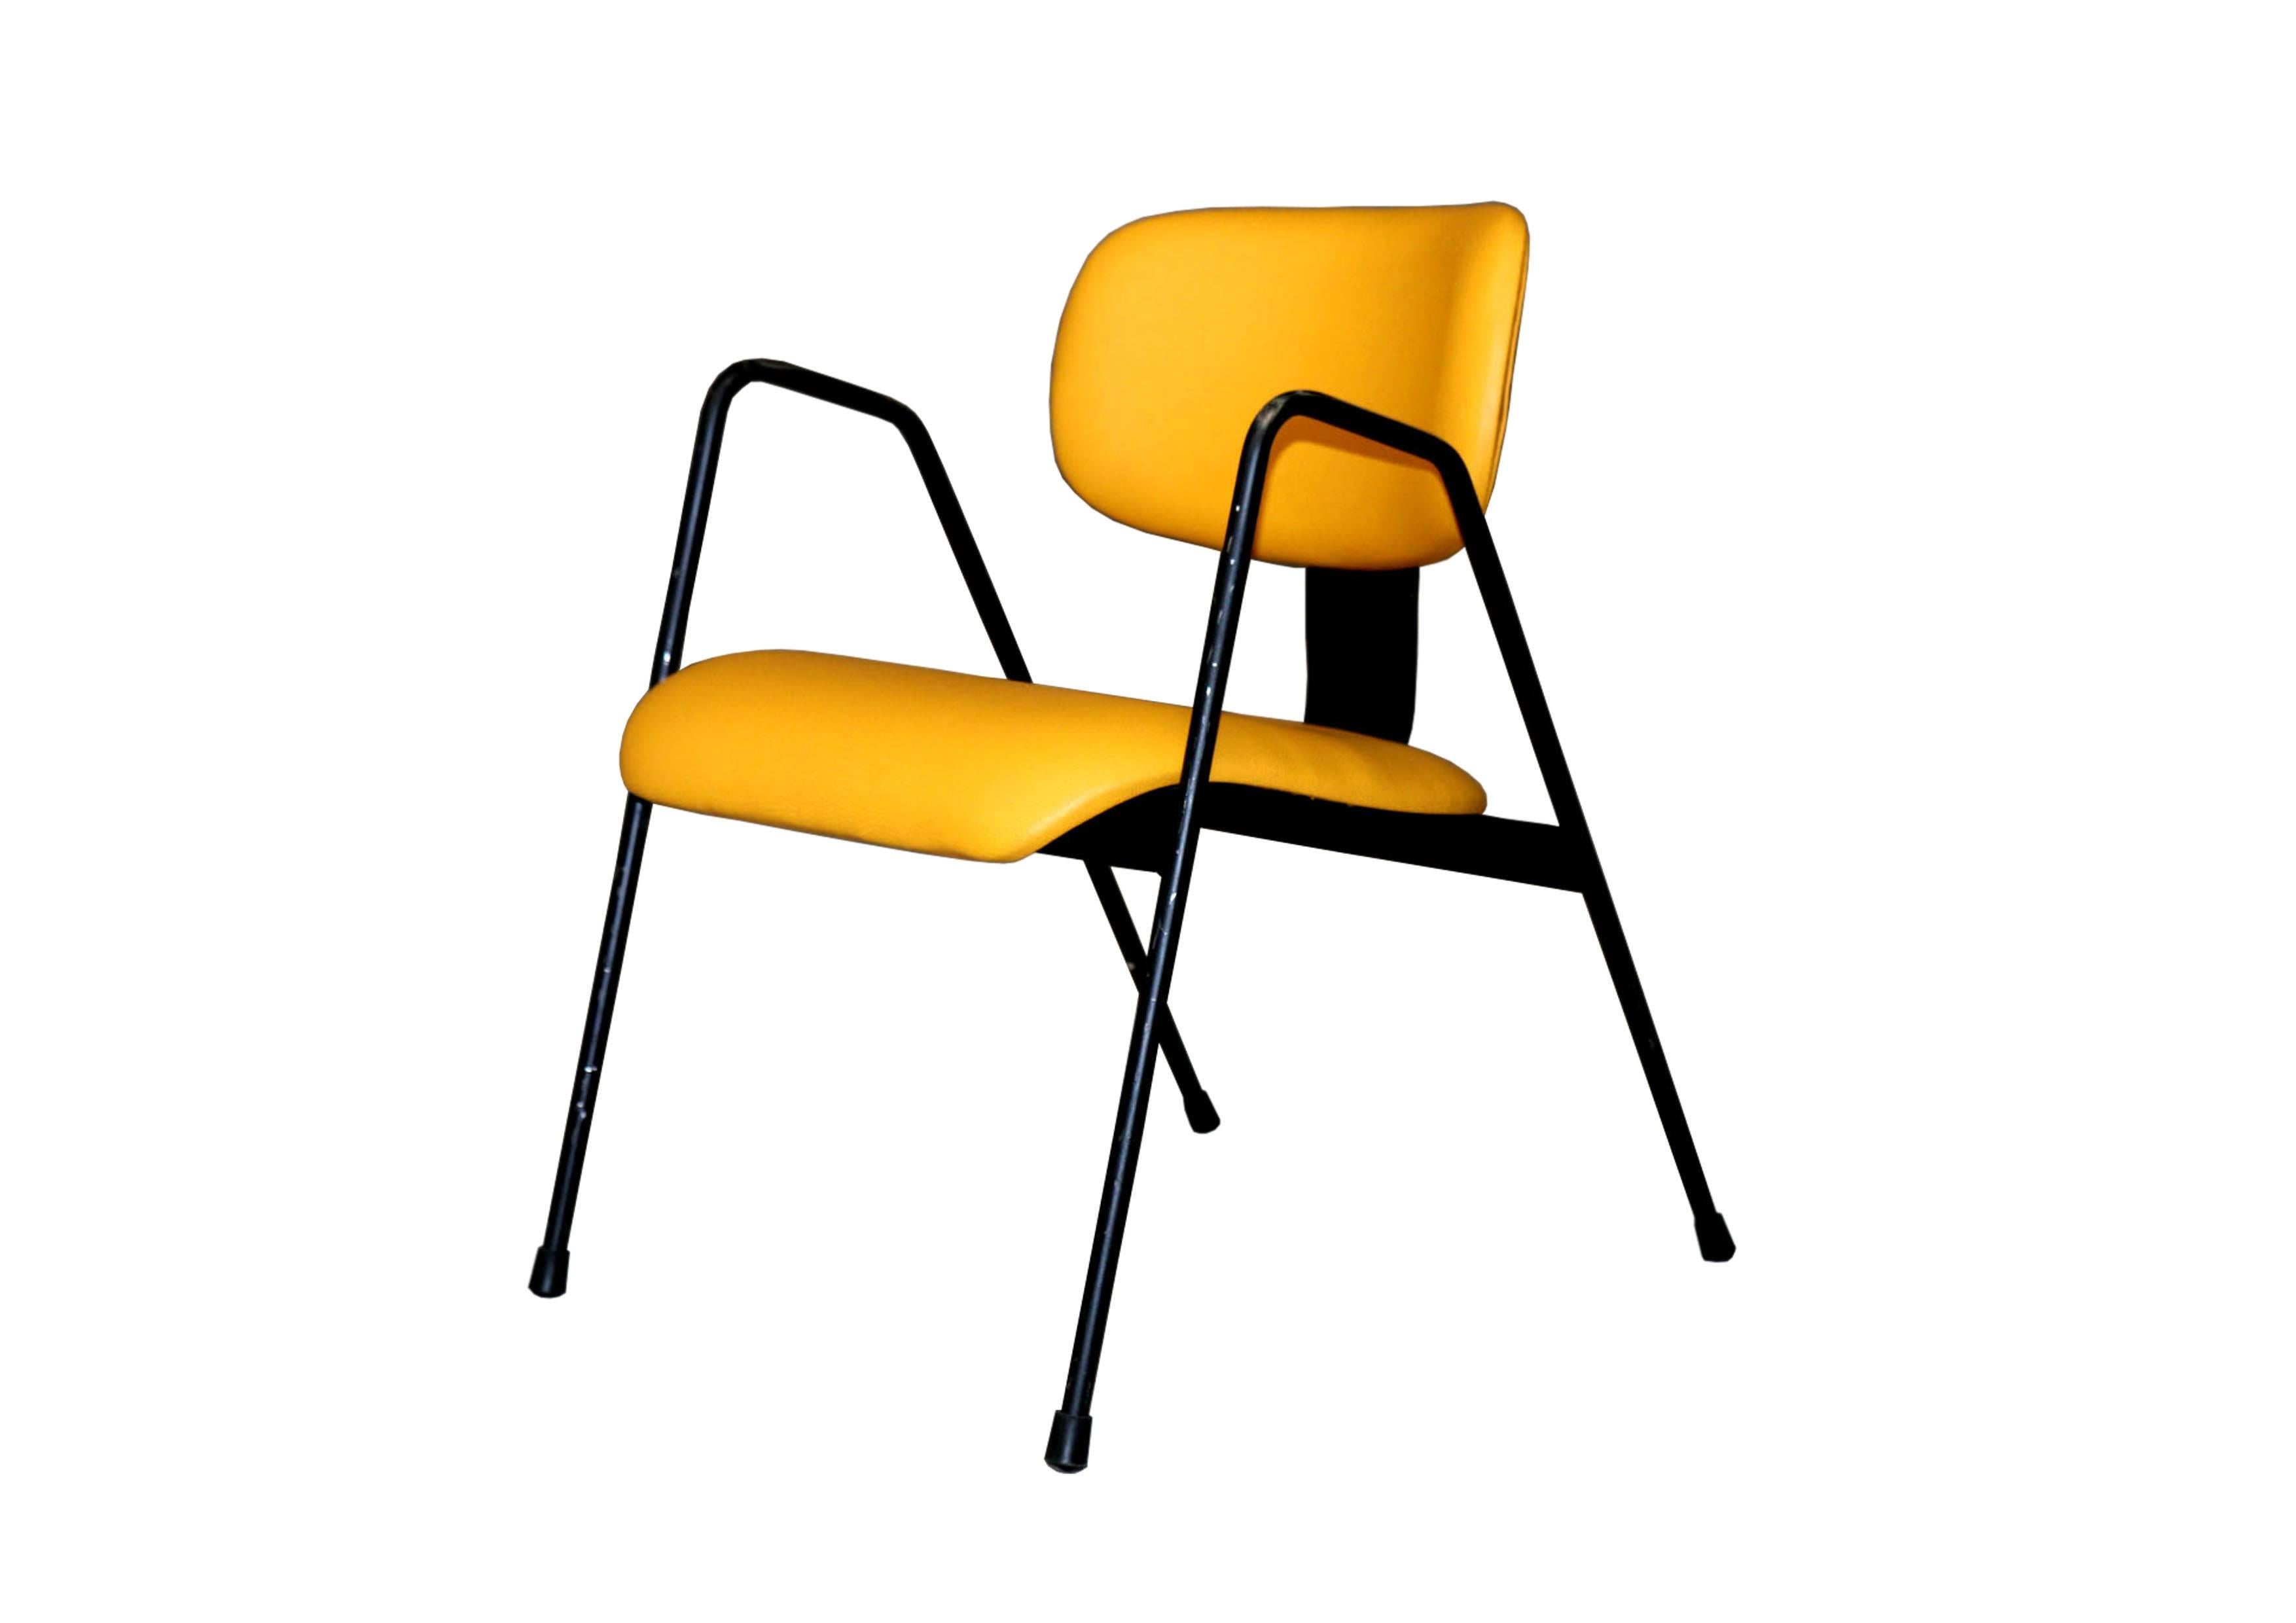 Willy Van Der Meeren F1 armchair for Tubax, Belgium, circa 1952. Six easy chairs enameled steel structure and yellow vinyl upholstery. The chairs have been reupholstered in our workshop. Also six orange vinyl F1 armchairs available. See other